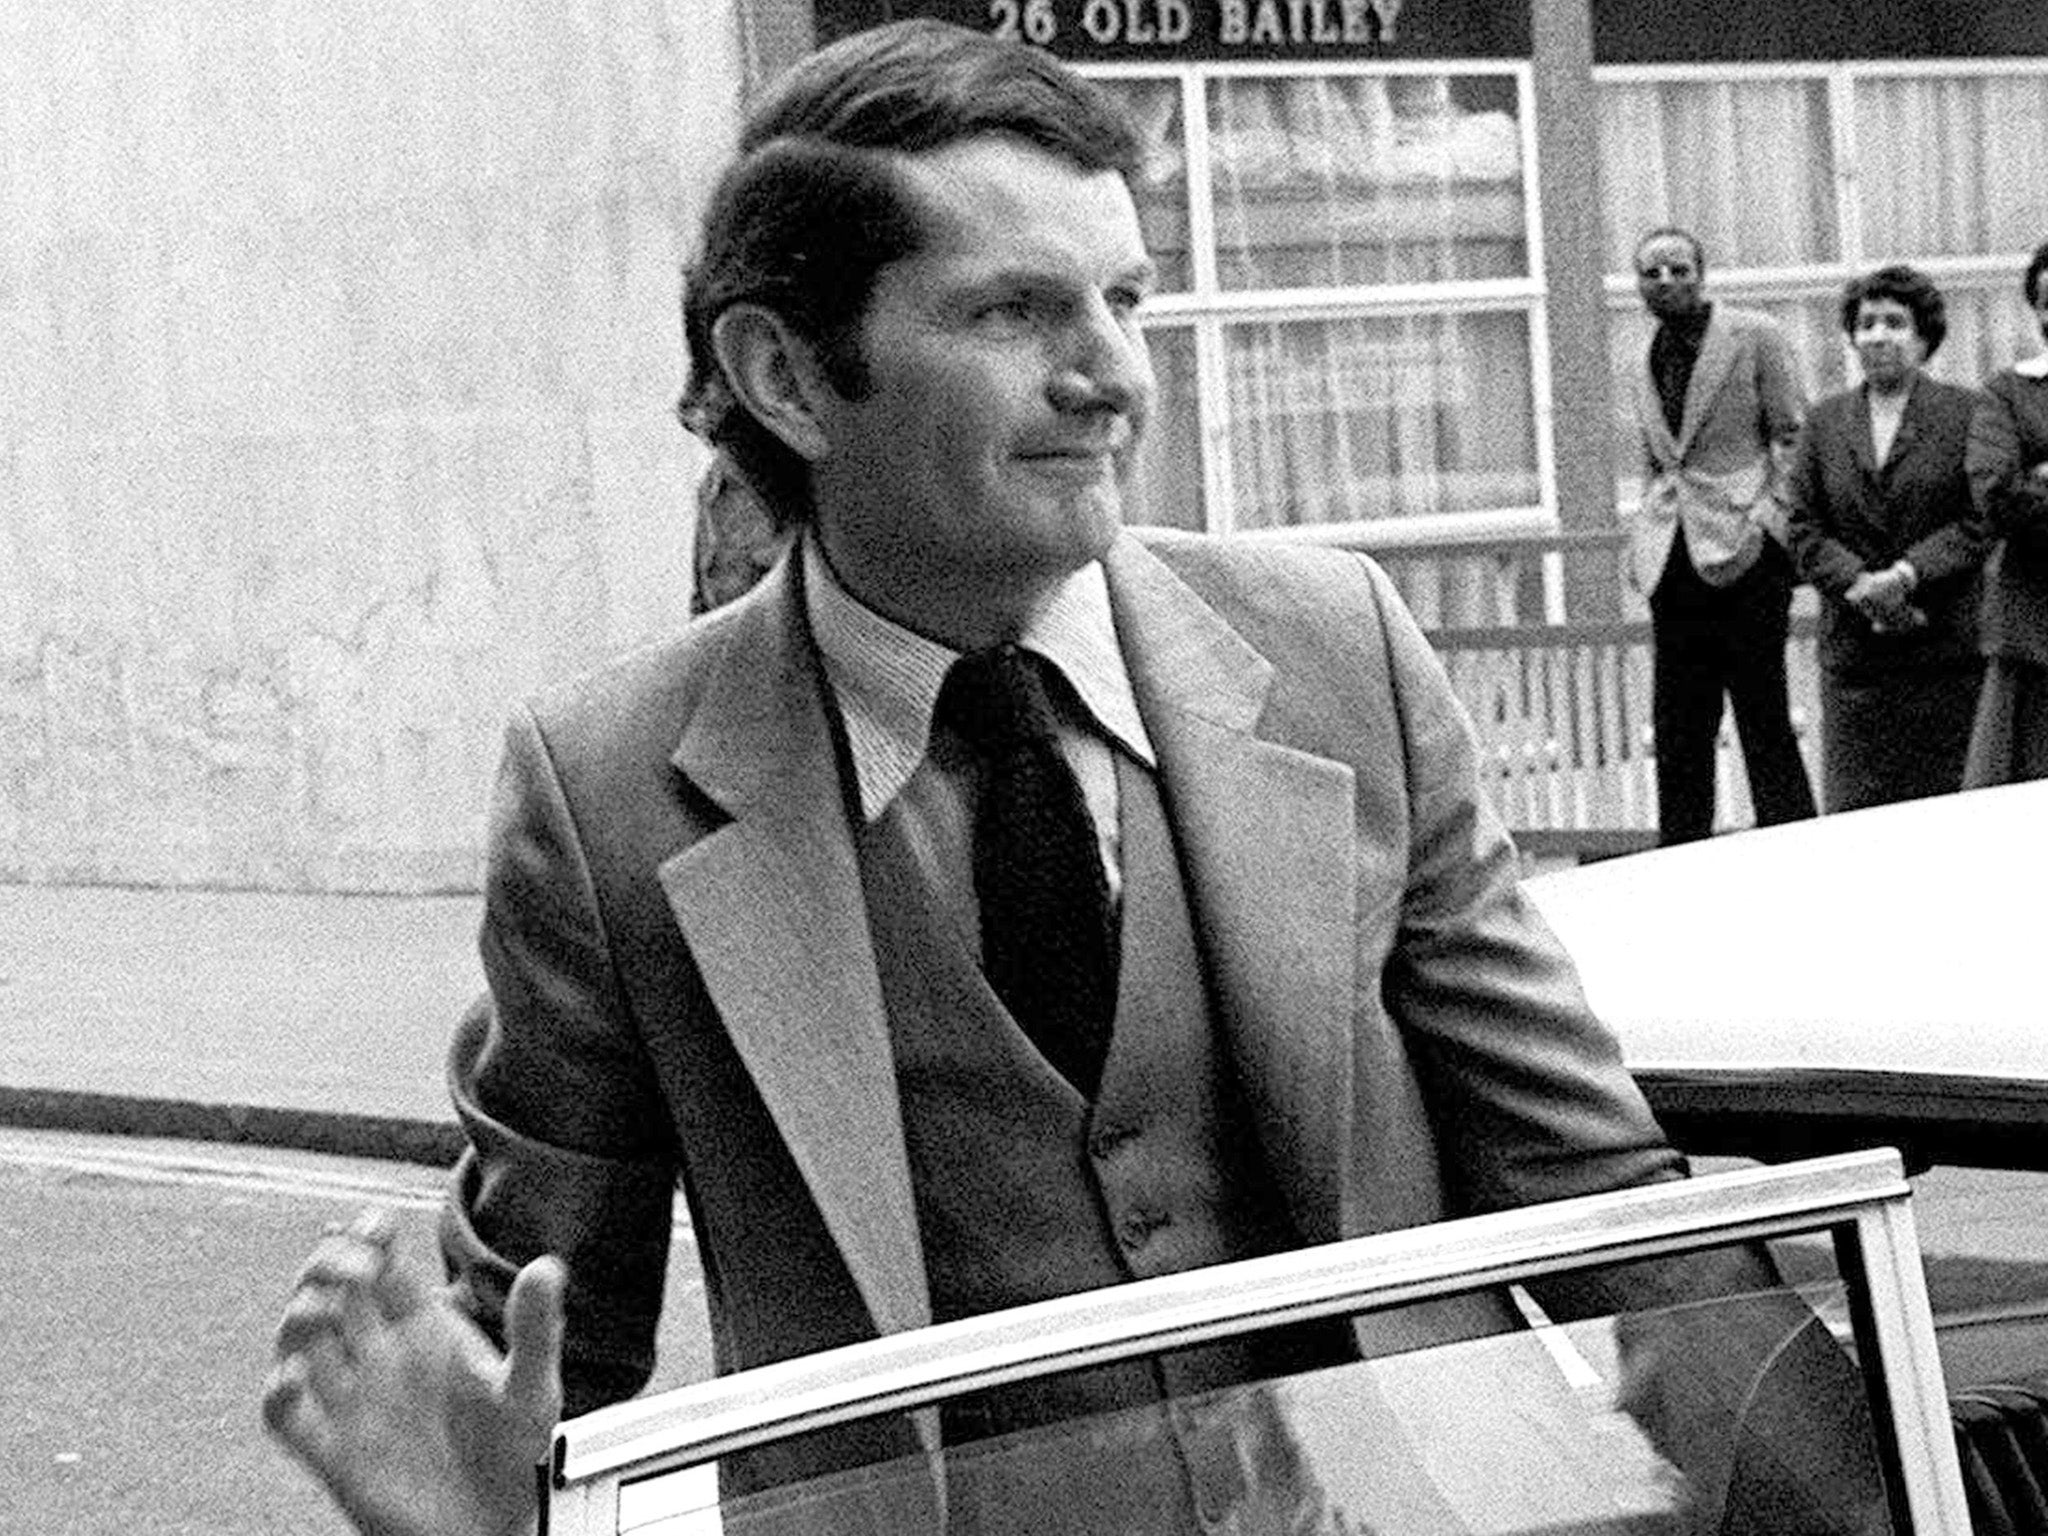 Norman Scott, seen here at the 1979 Old Bailey trial, was a 20-year-old stable hand and part-time model when Thorpe first met him